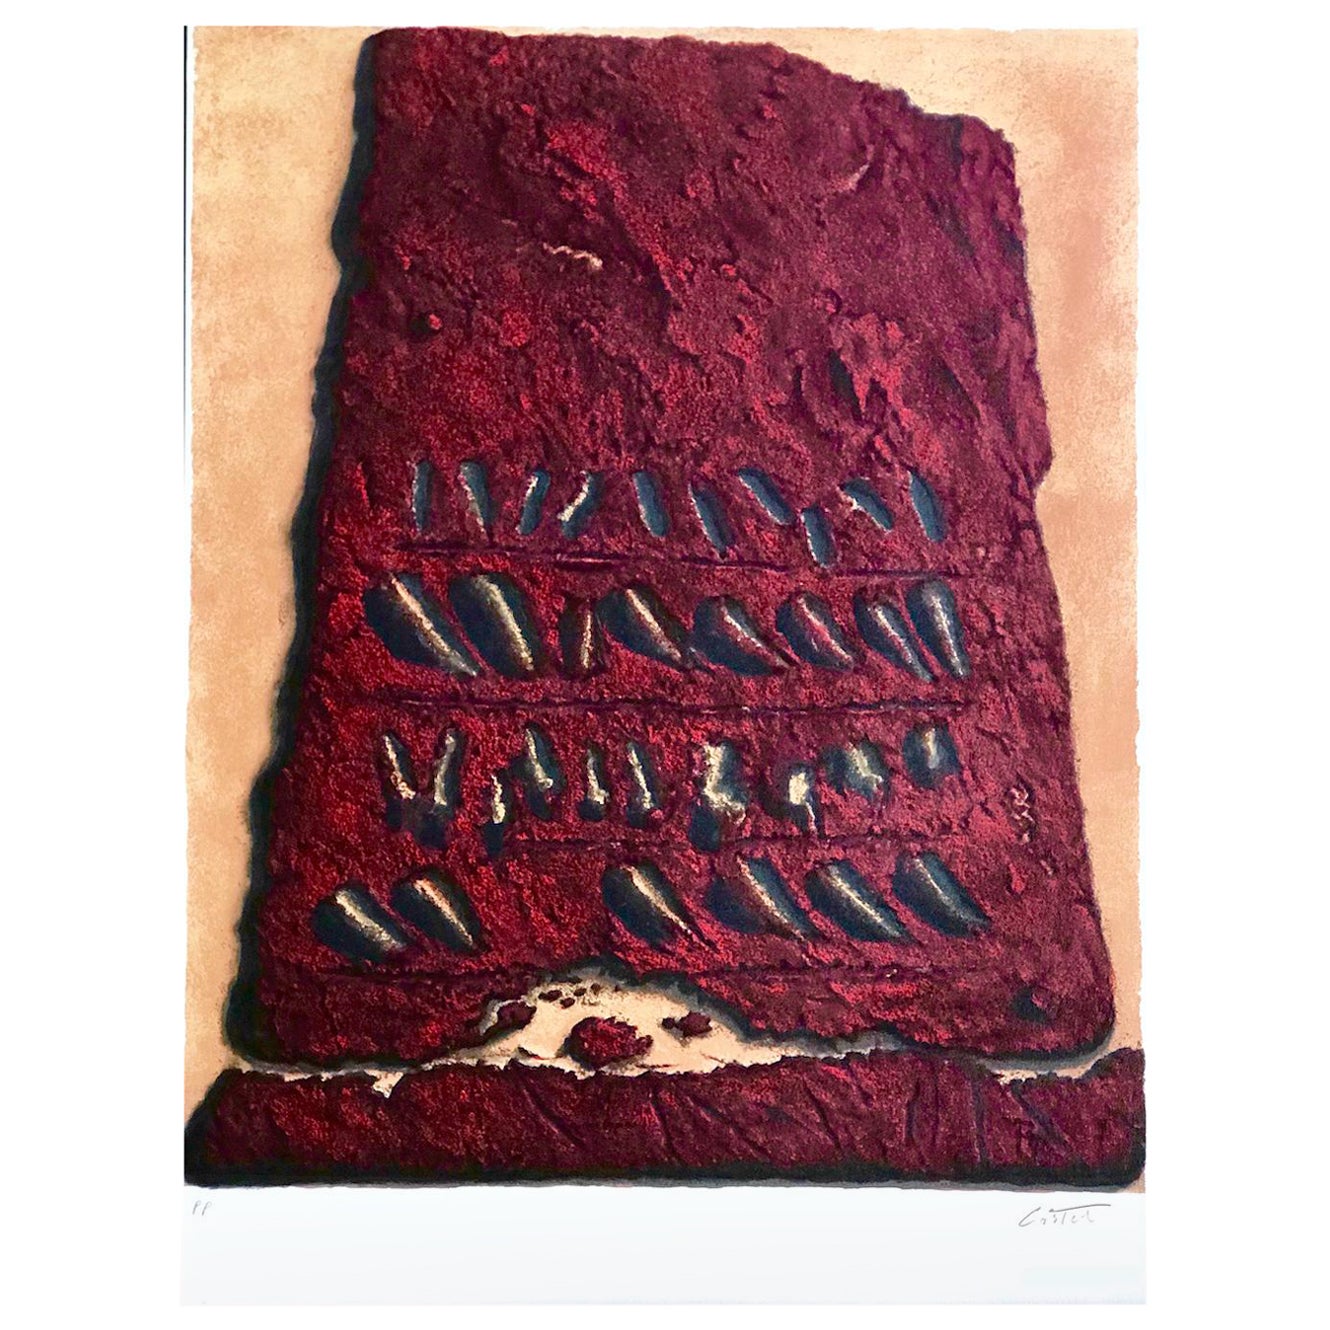 SECRET WRITINGS Signed Lithograph, Ancient Script, Red Stone Tablet